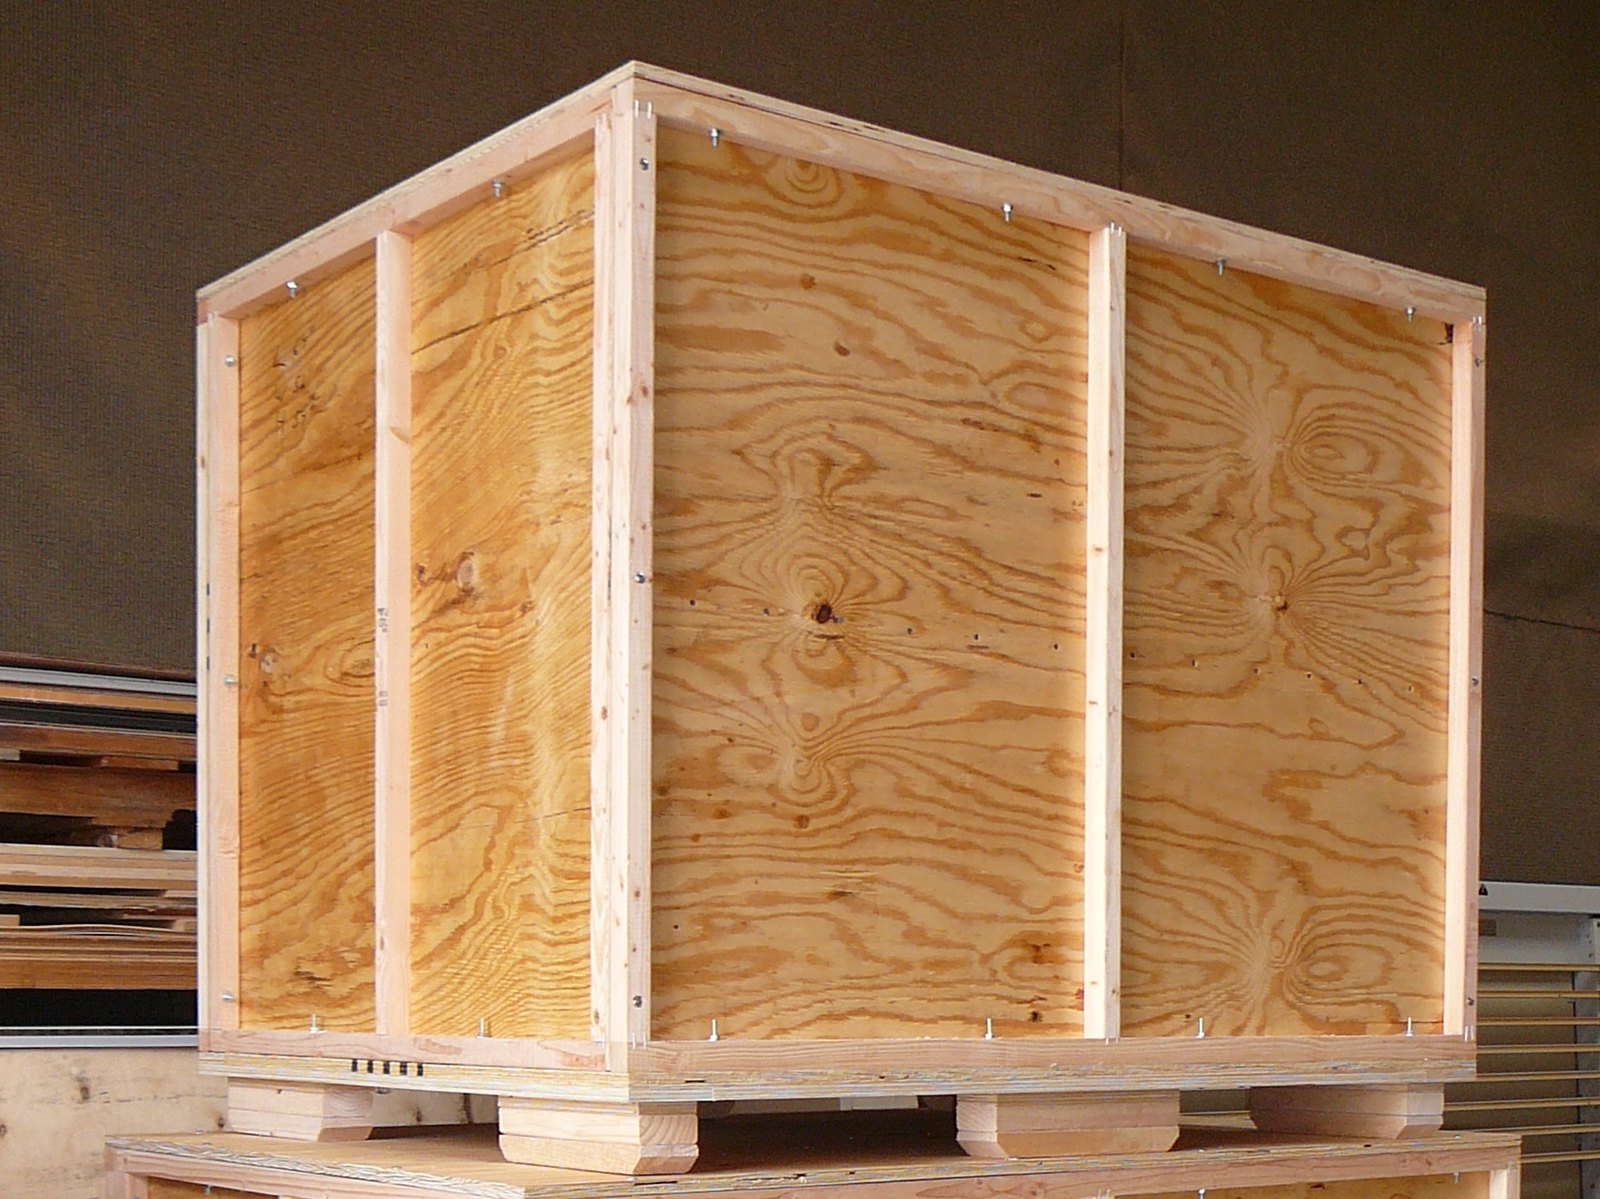 How to Build a Crate for Shipping